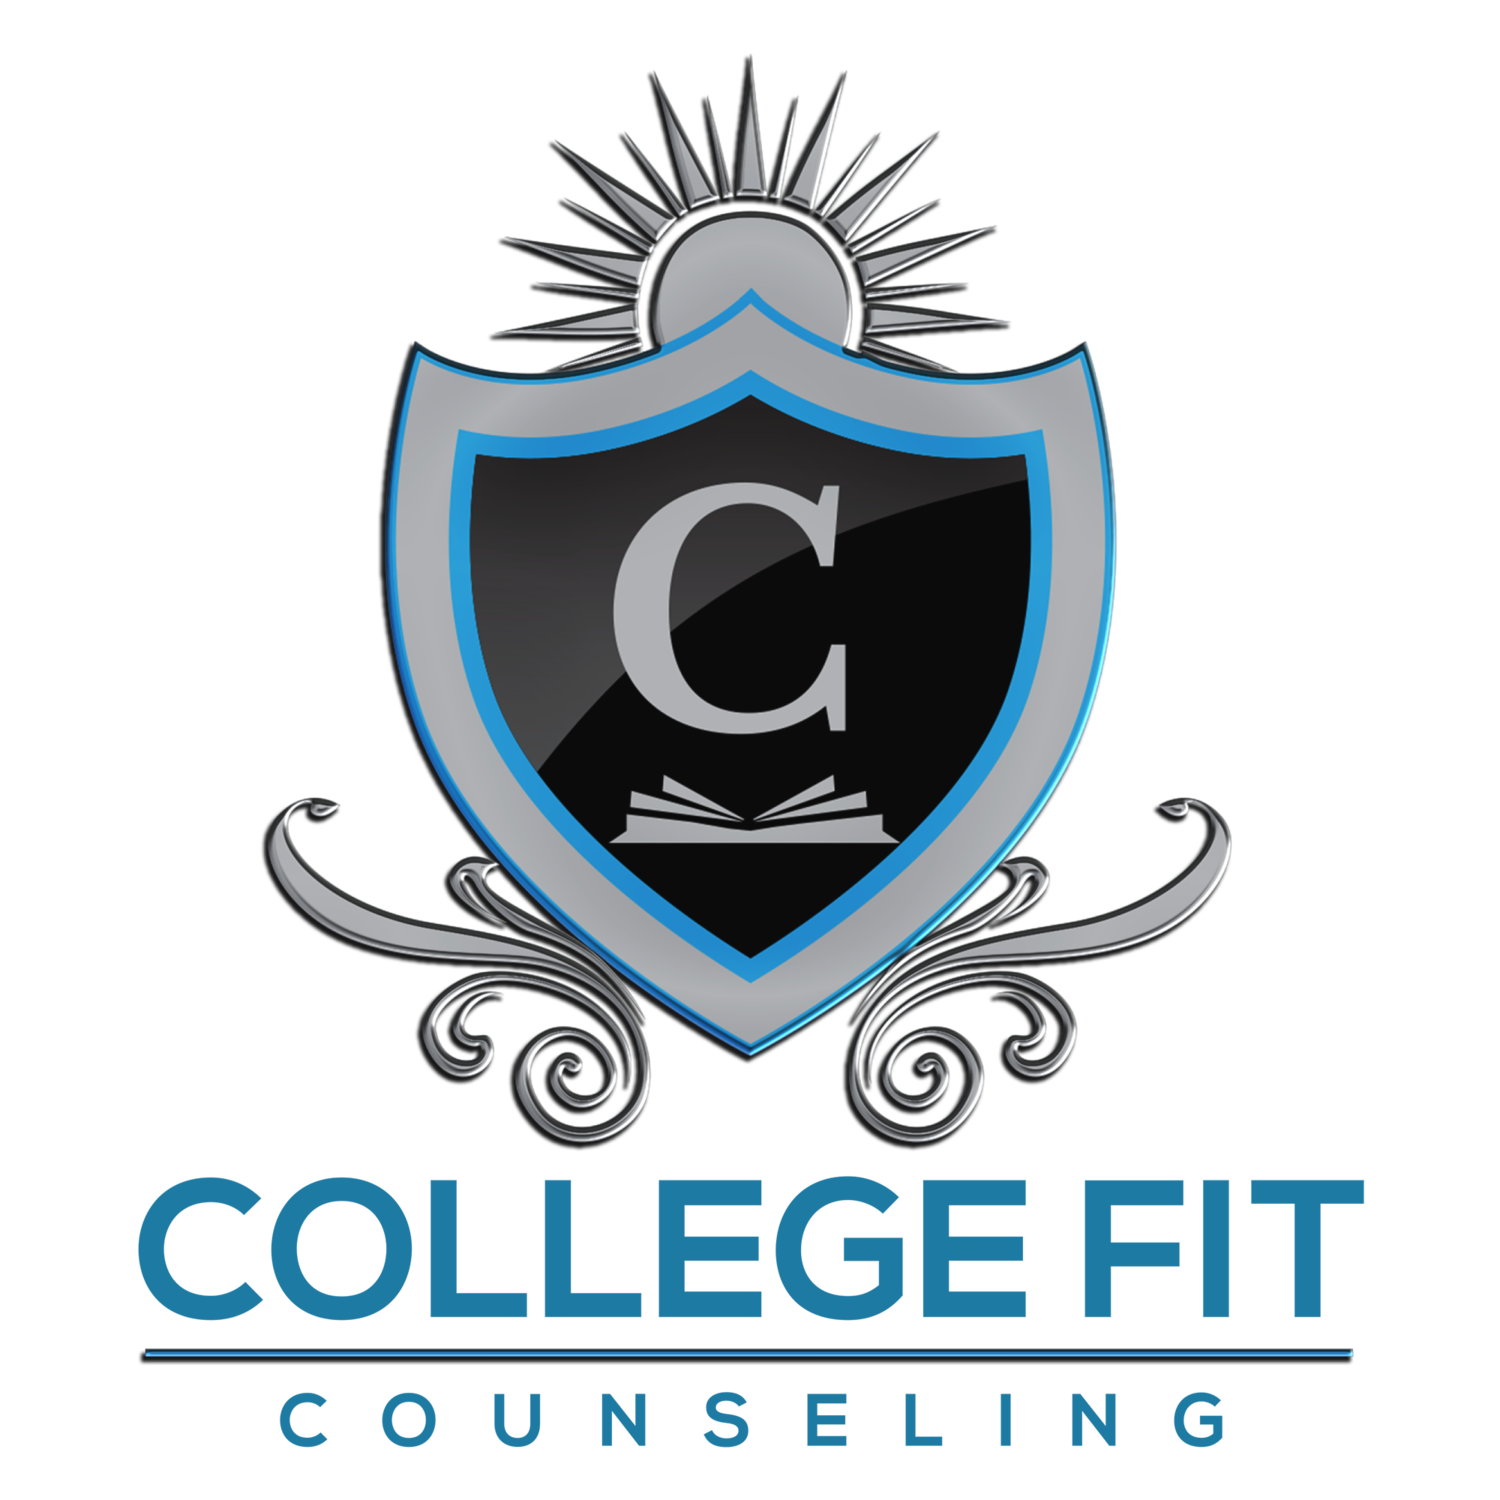 College Fit Counseling